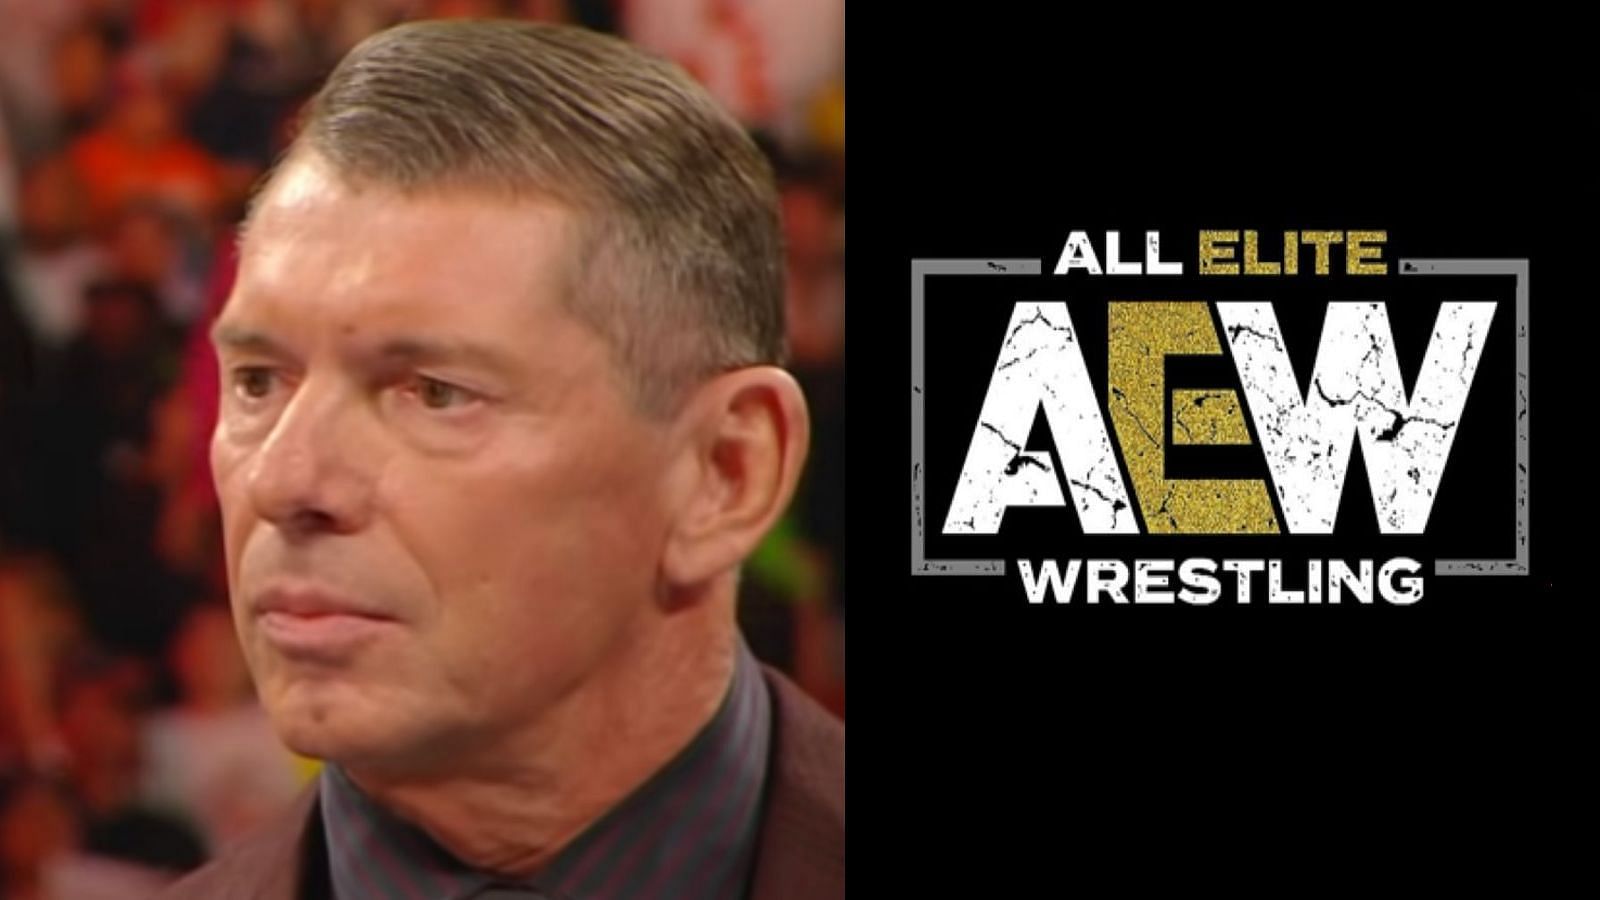 Vince McMahon is the former chairman of World Wrestling Entertainment